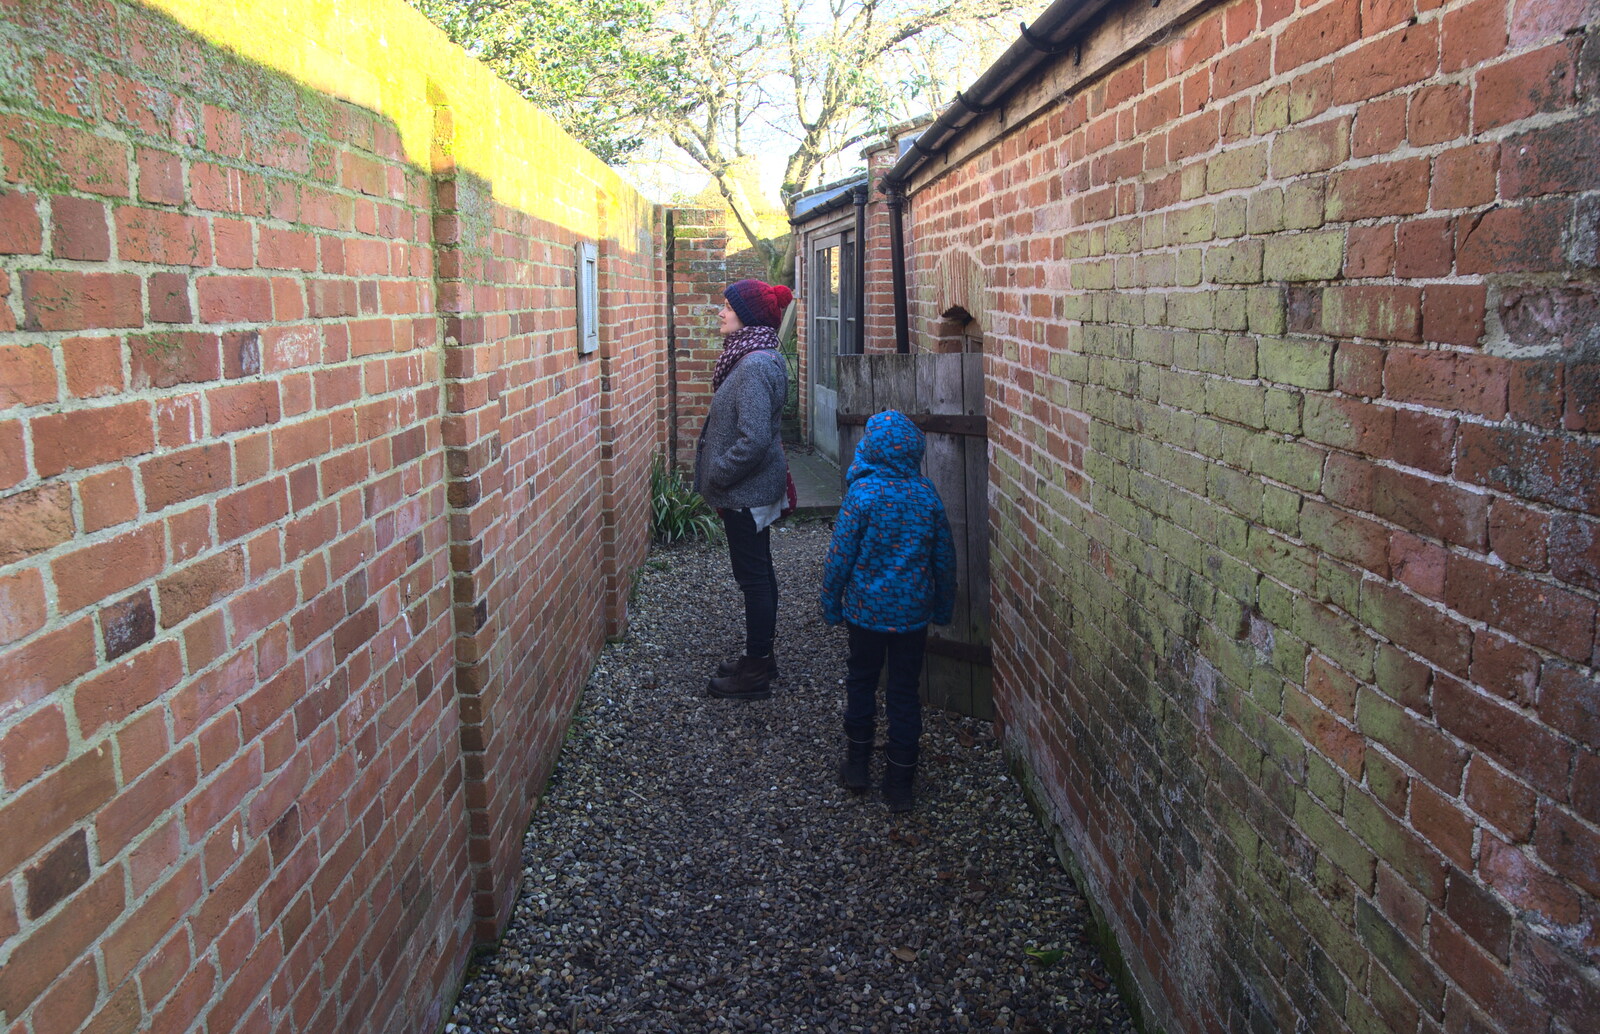 Isobel looks at something down an alley from A Day in Lavenham, Suffolk - 22nd January 2017